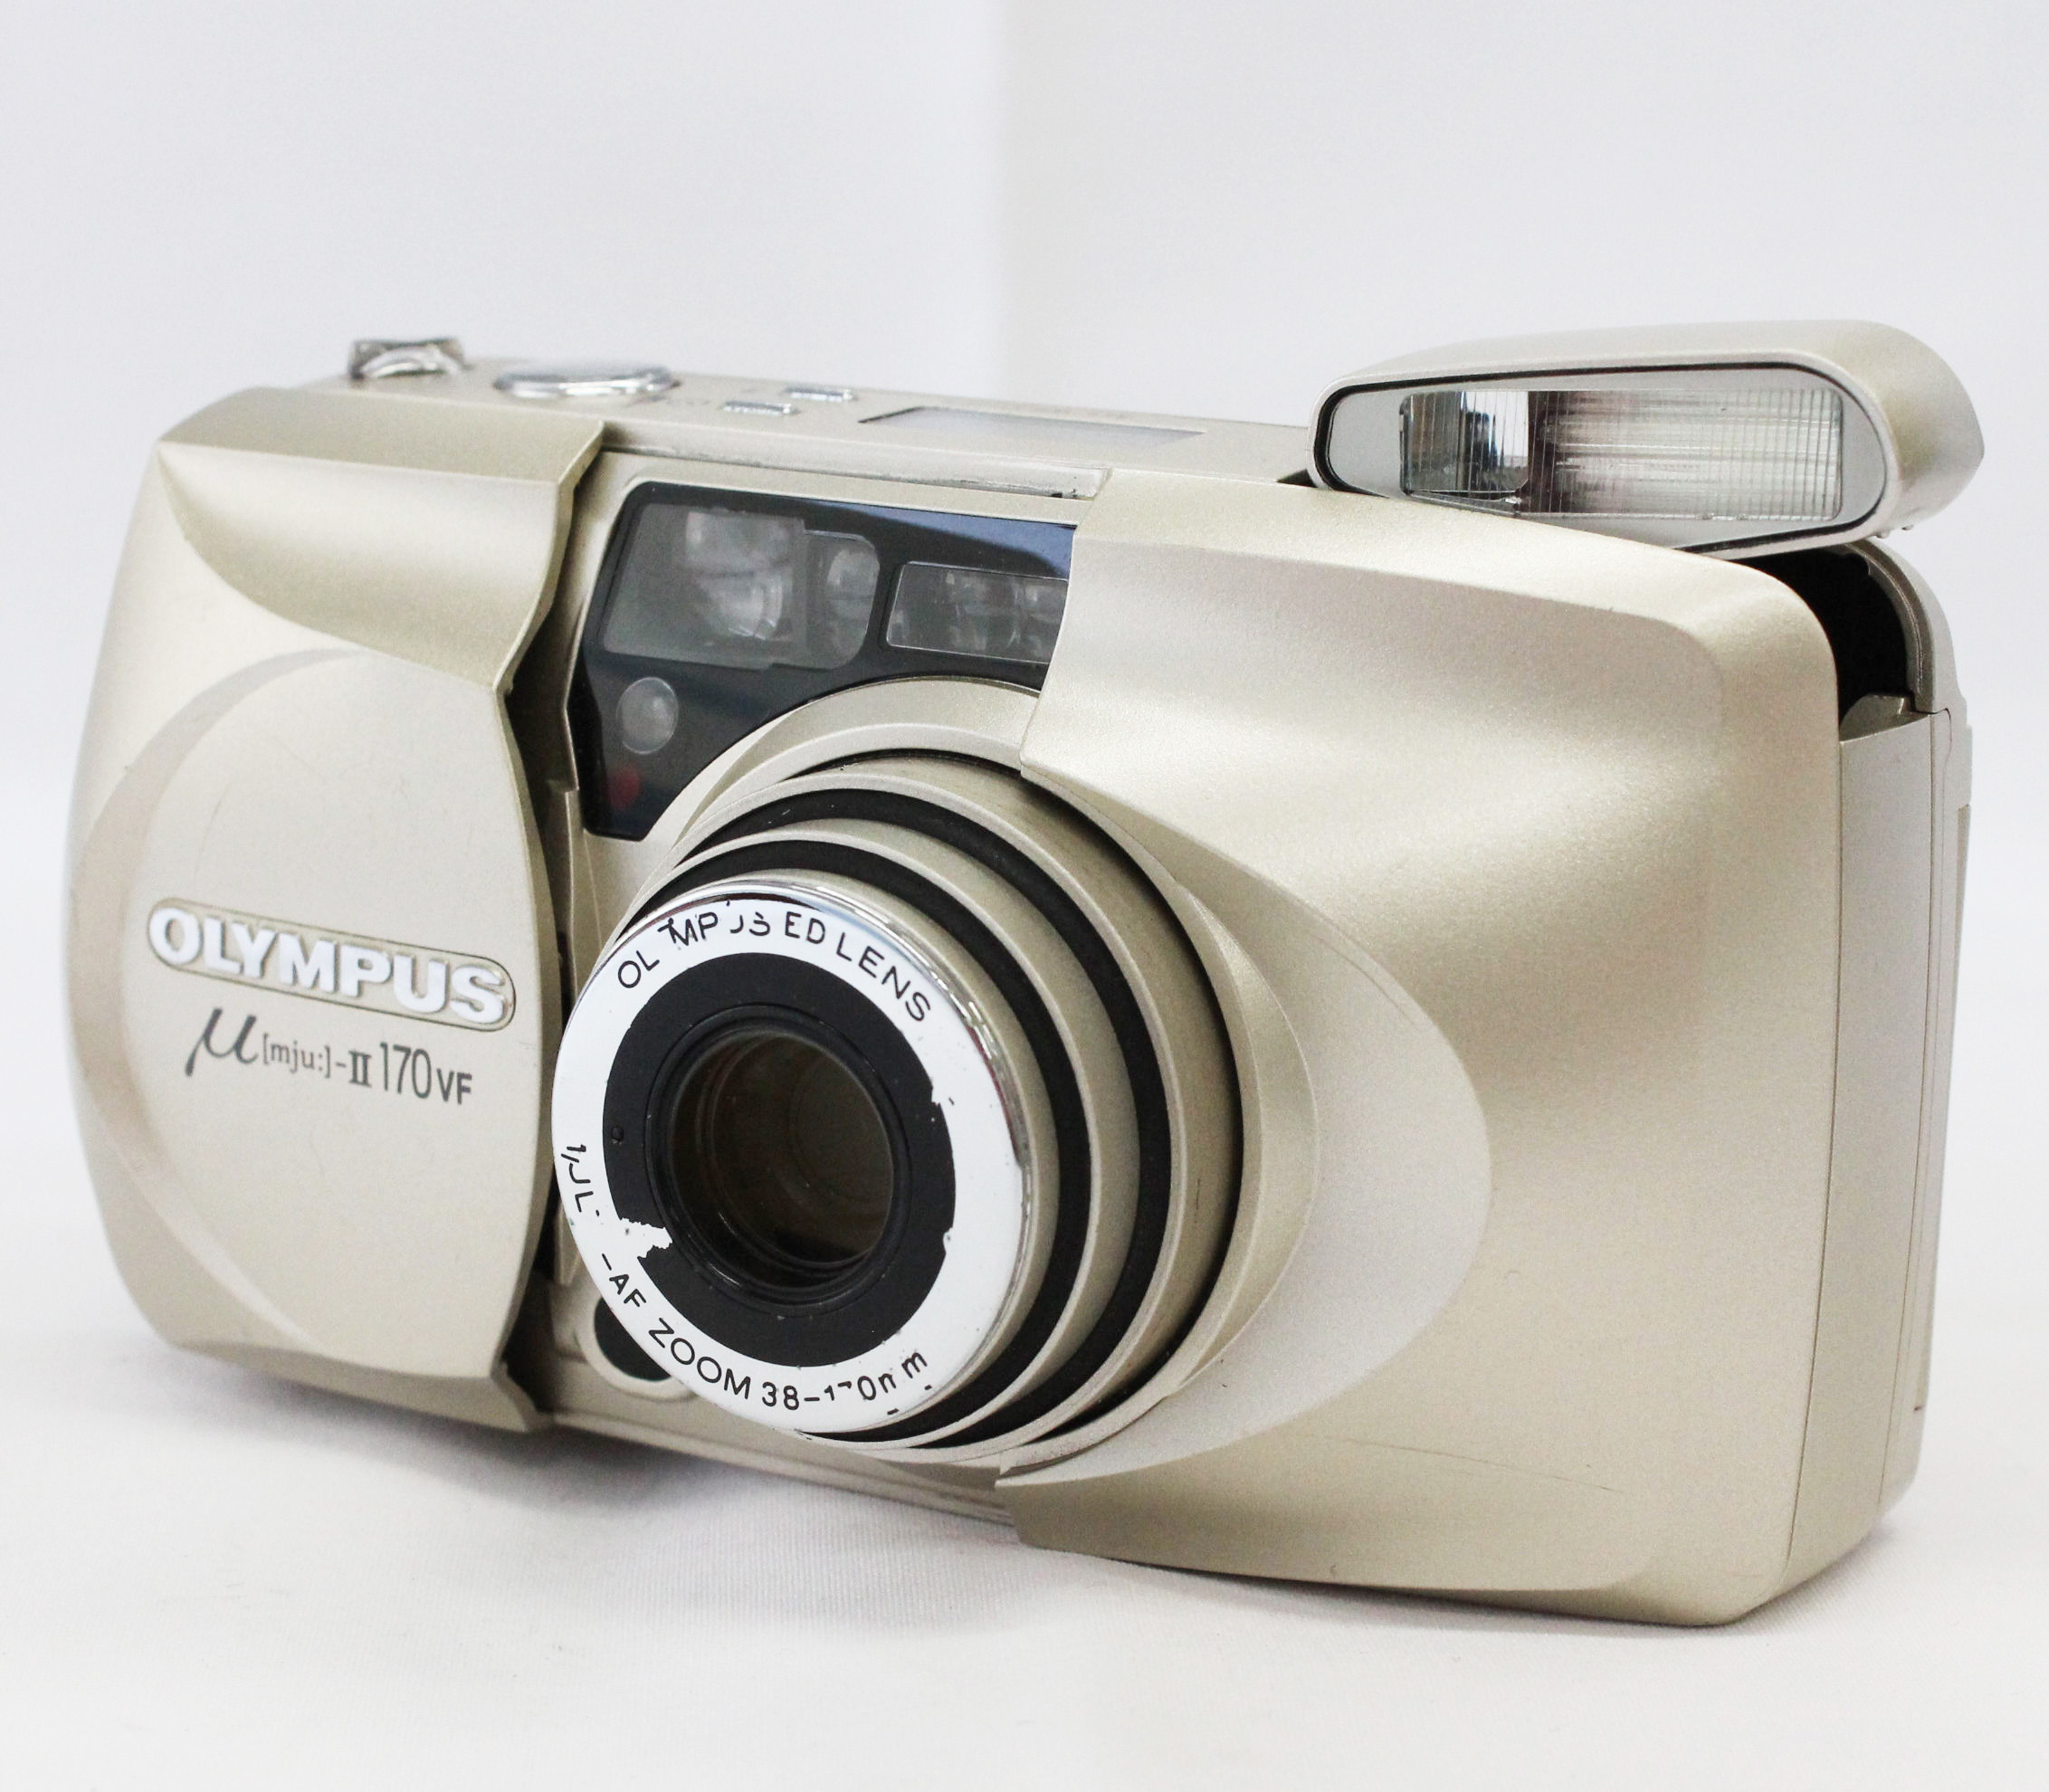  Olympus μ MJU II 170 VF Multi-AF Zoom 35mm Point & Shoot Film Camera with Remote Control RC-300C from Japan Photo 0